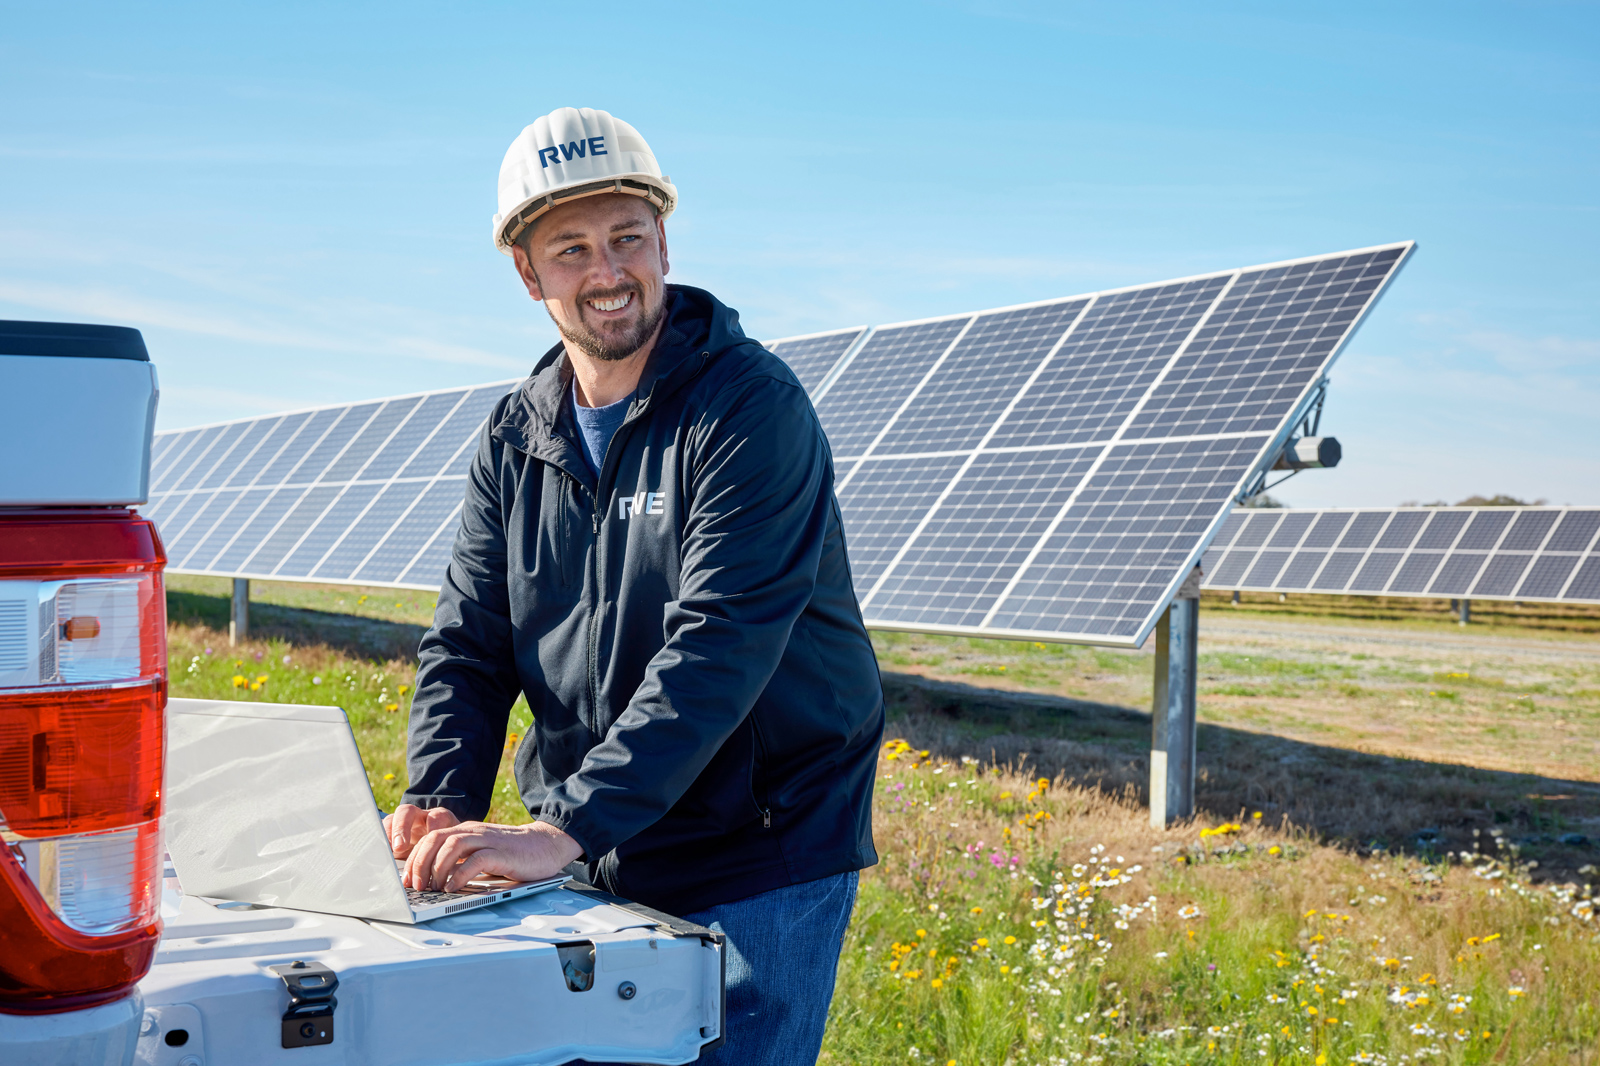 We’ll check its solar potential - Become a solar partner | Benefits with RWE